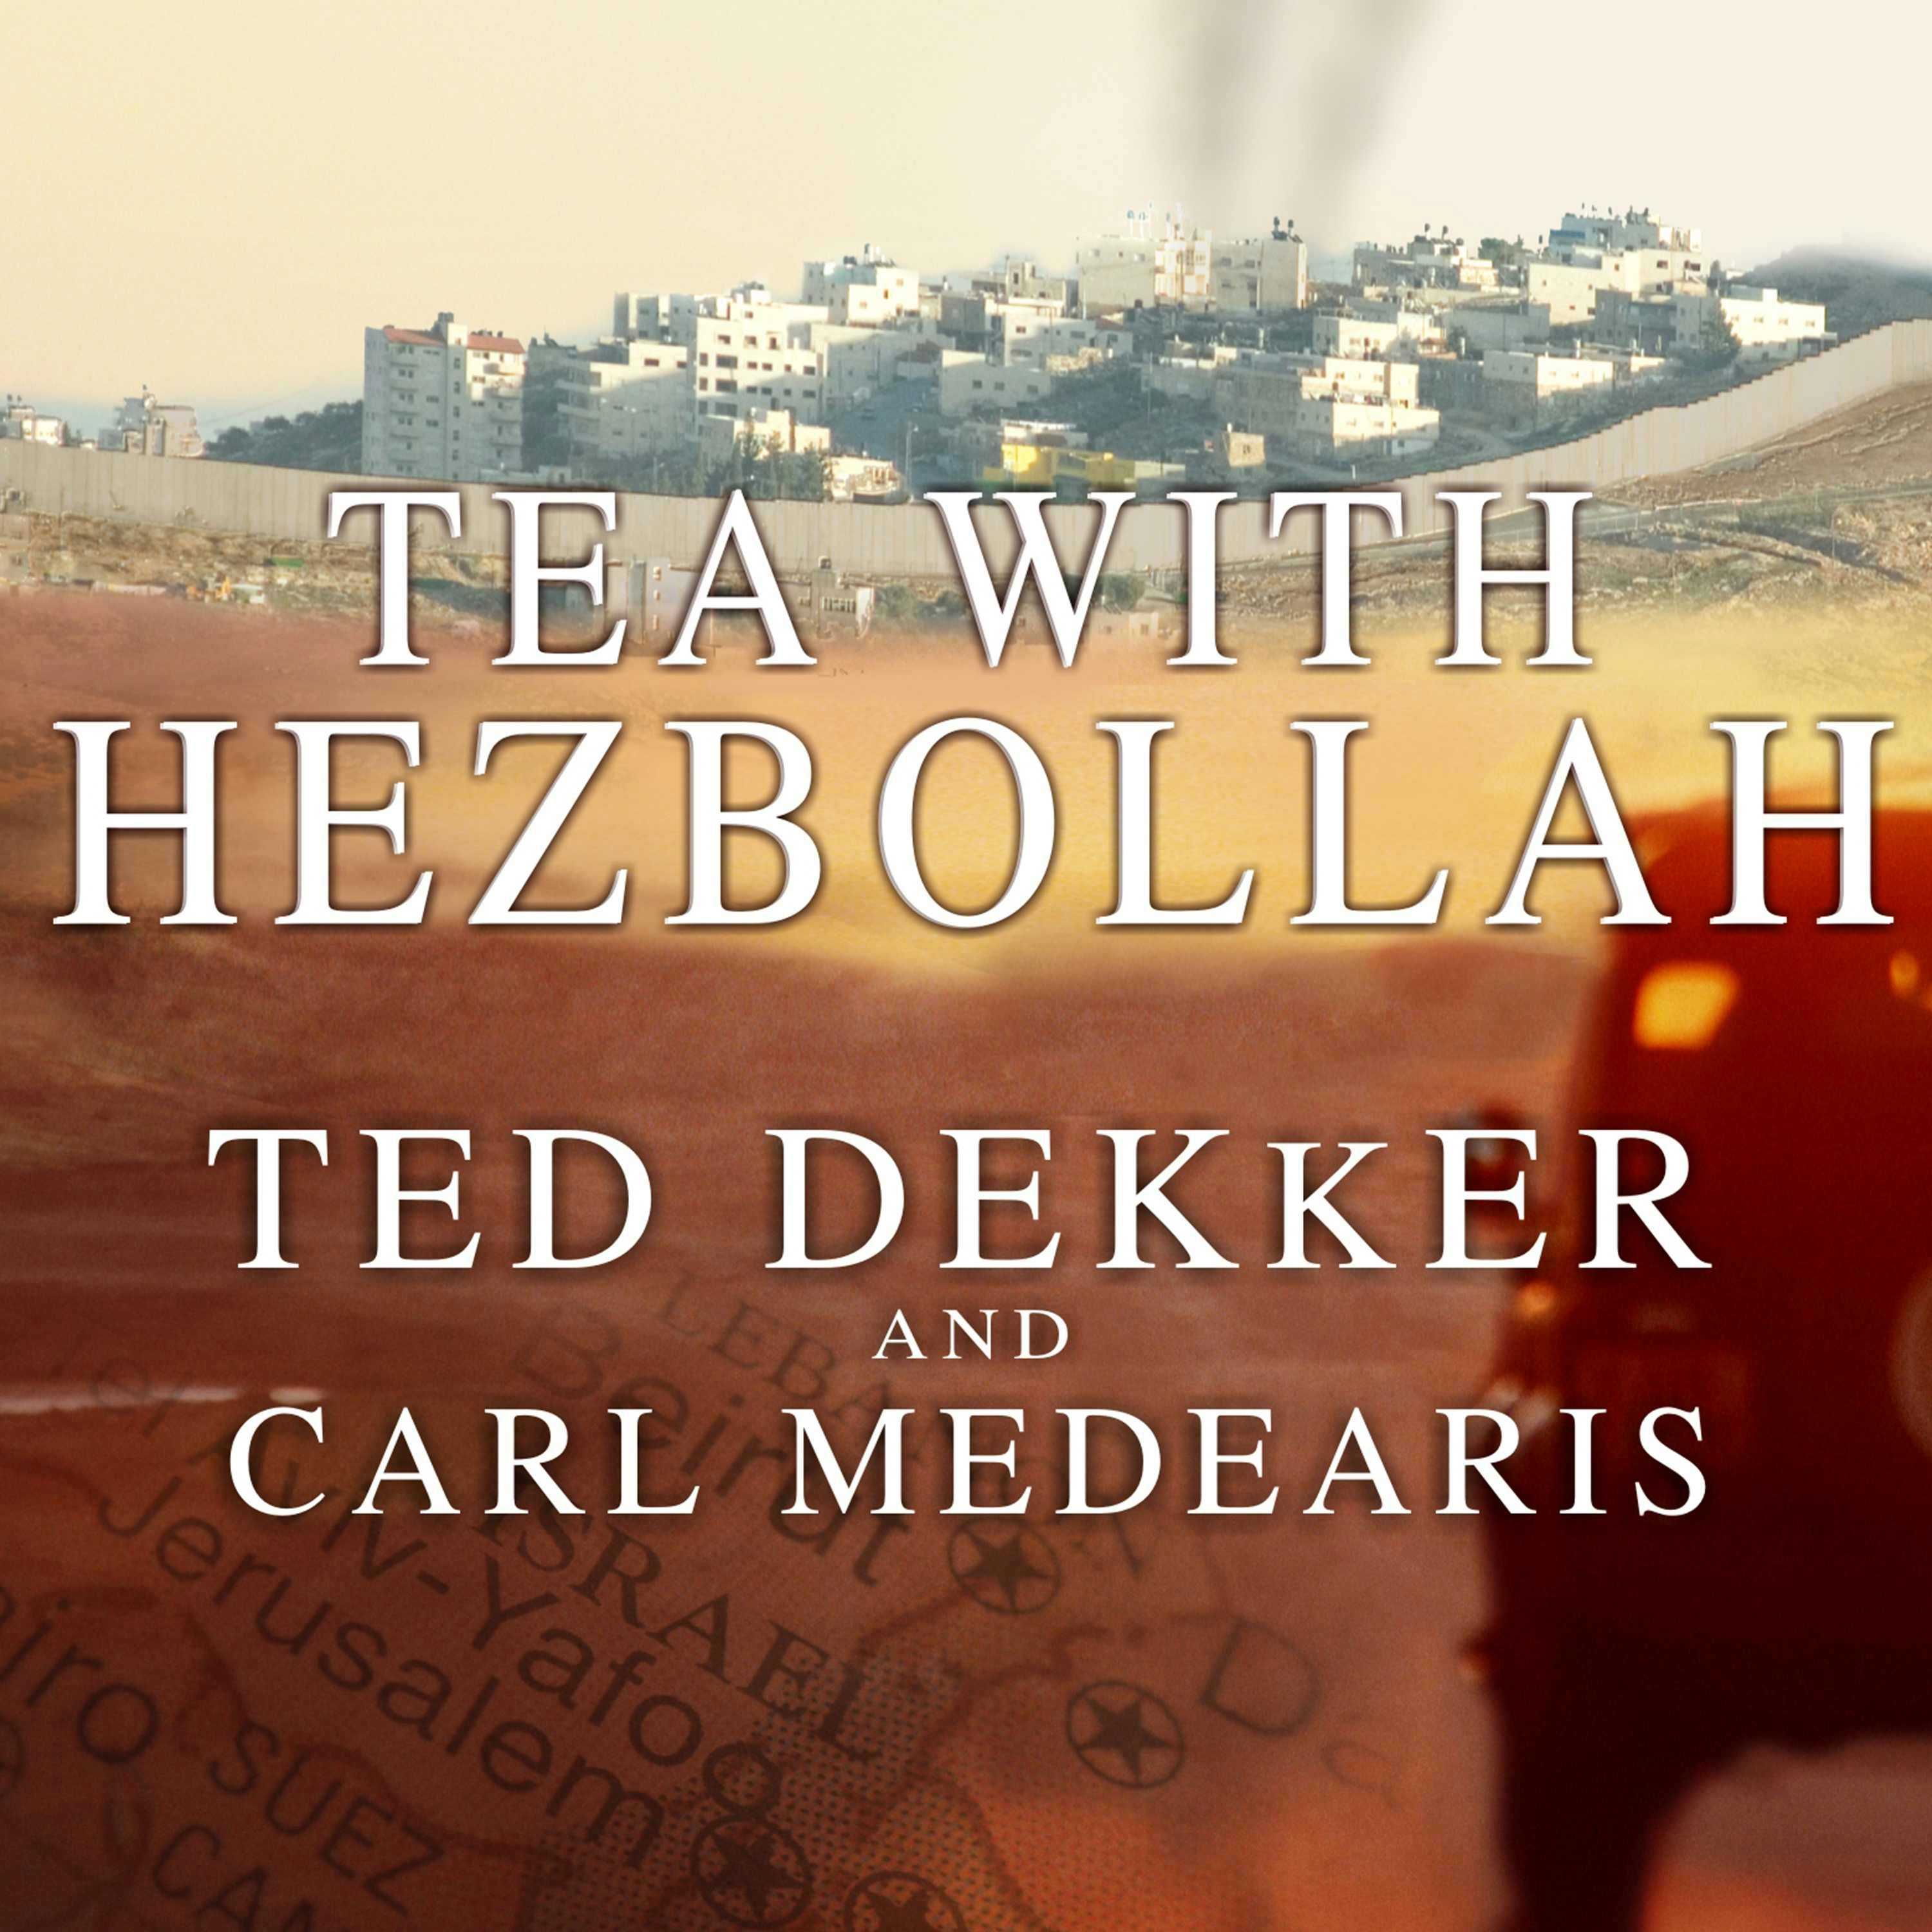 Tea with Hezbollah: Sitting at the Enemies' Table, Our Journey Through the Middle East - Carl Medearis, Ted Dekker